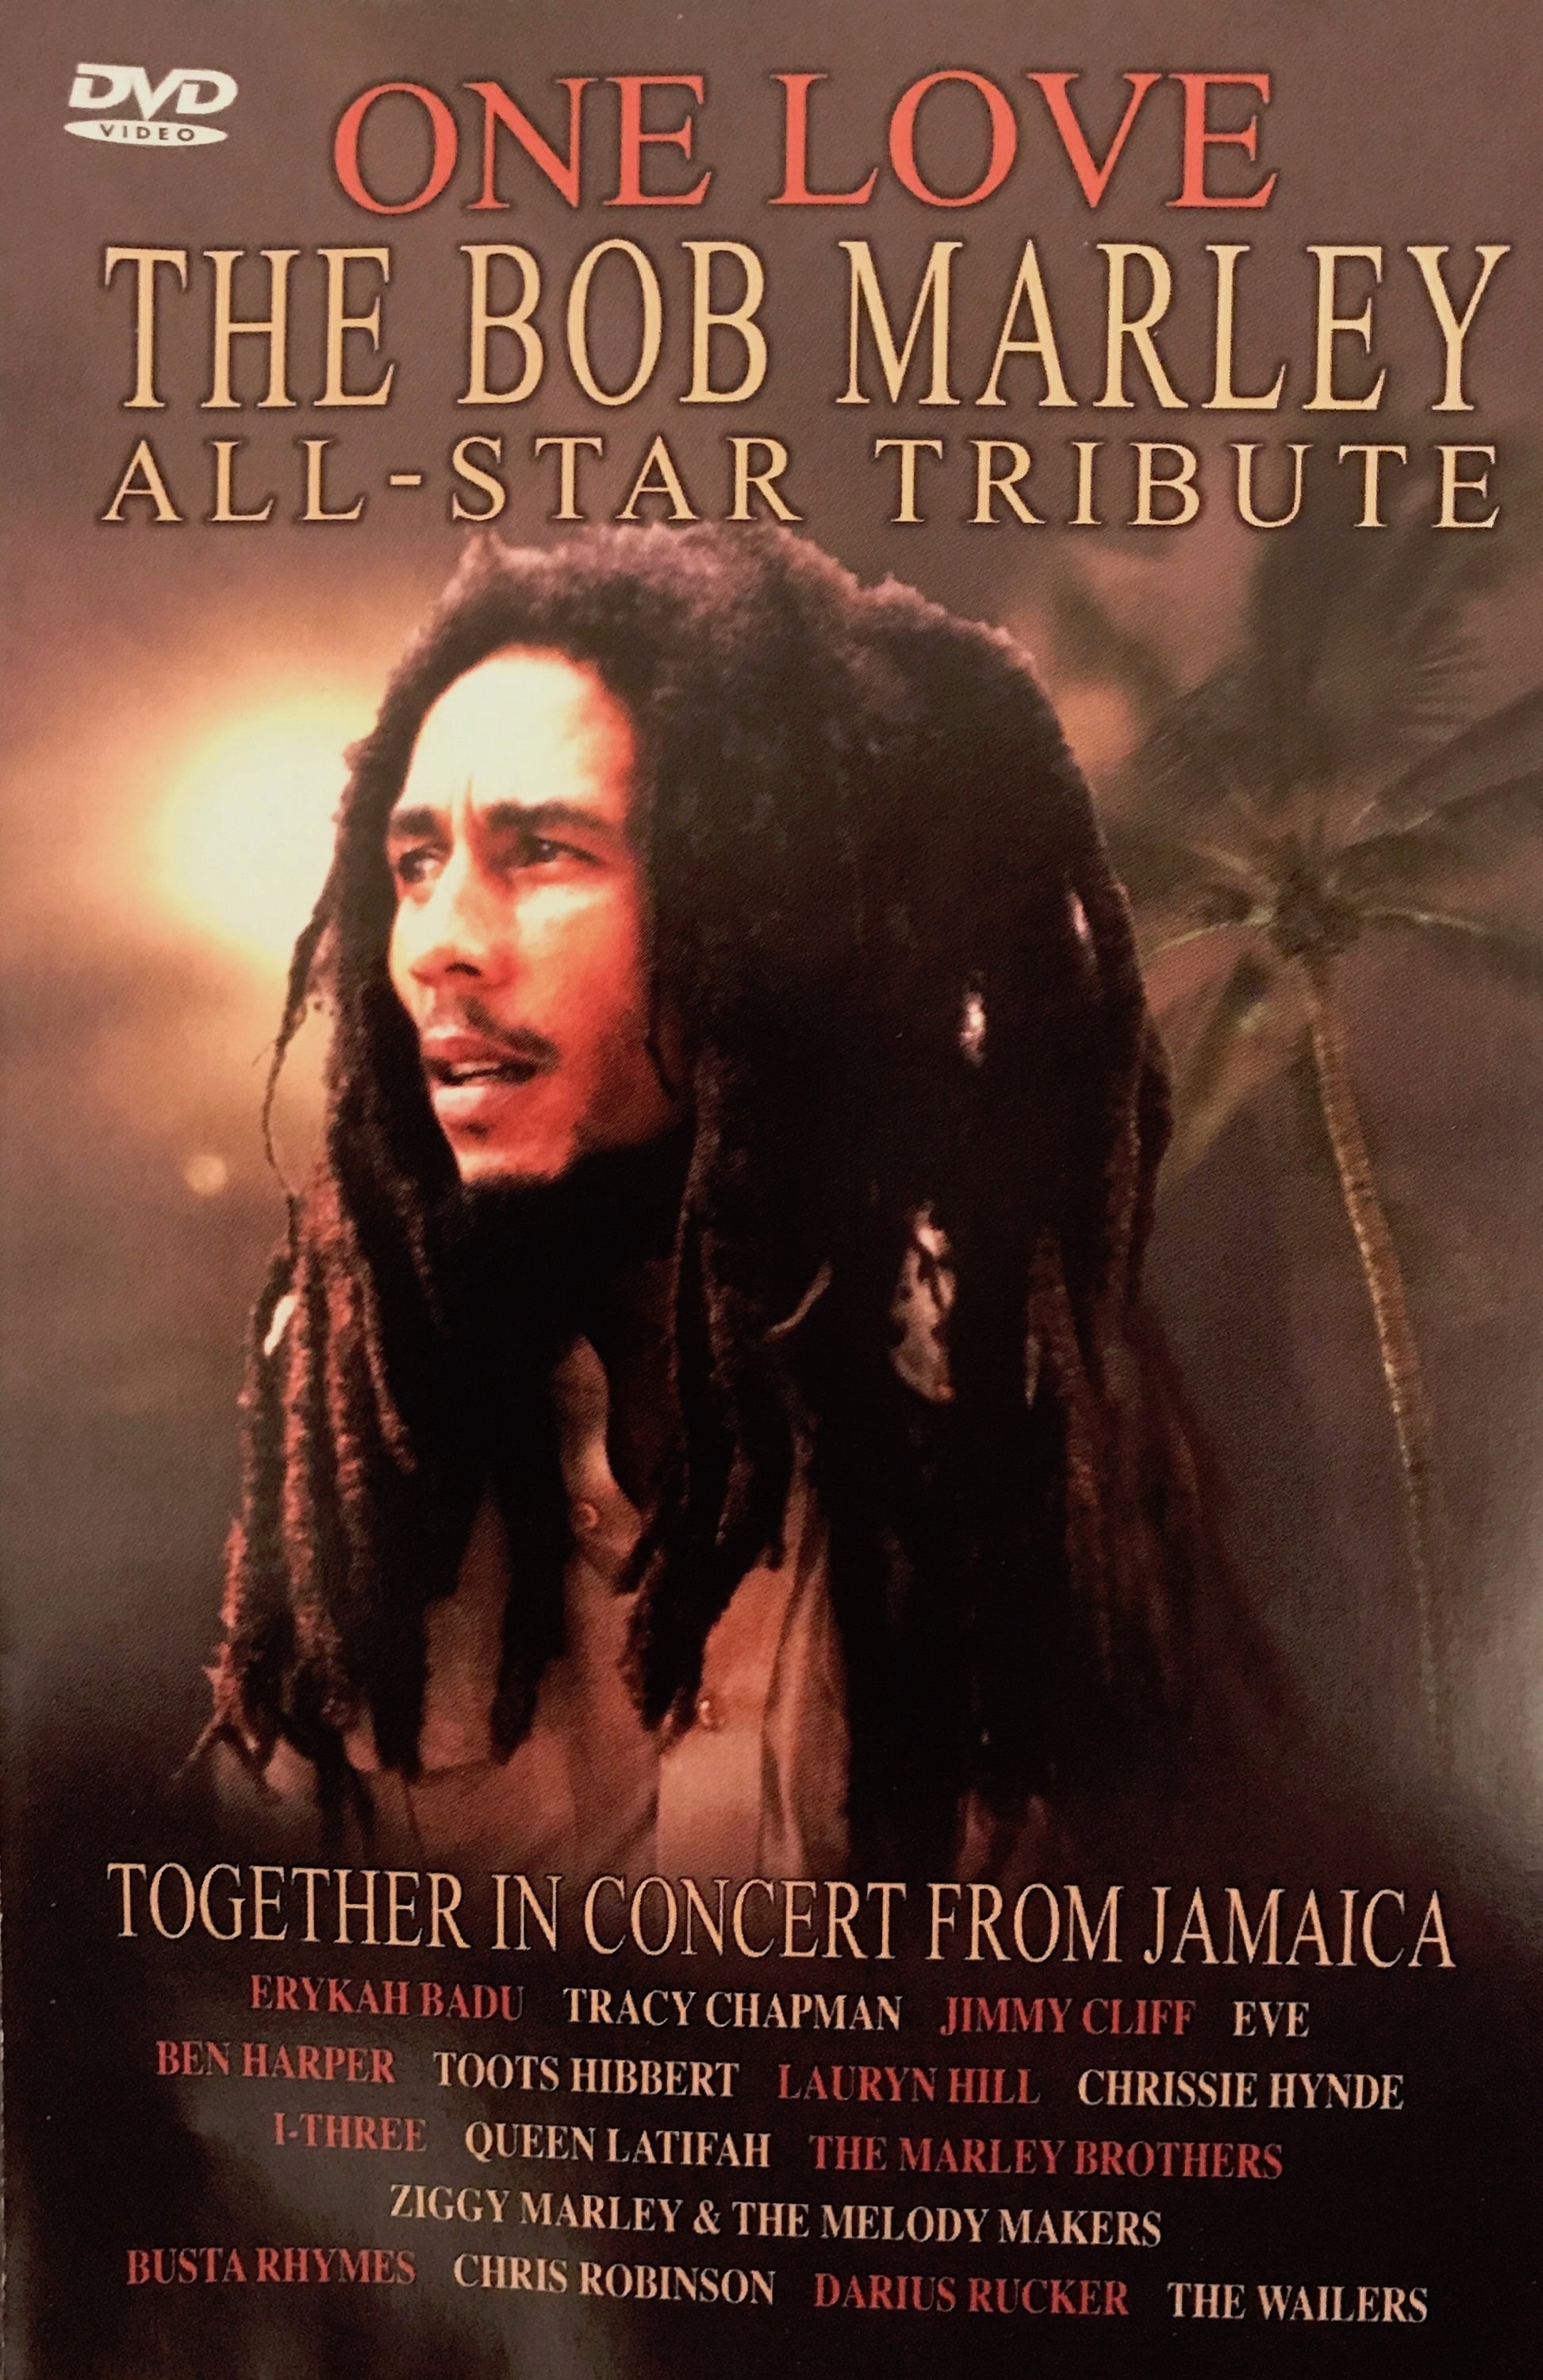 One love: The Bob Marley All-Star tribute